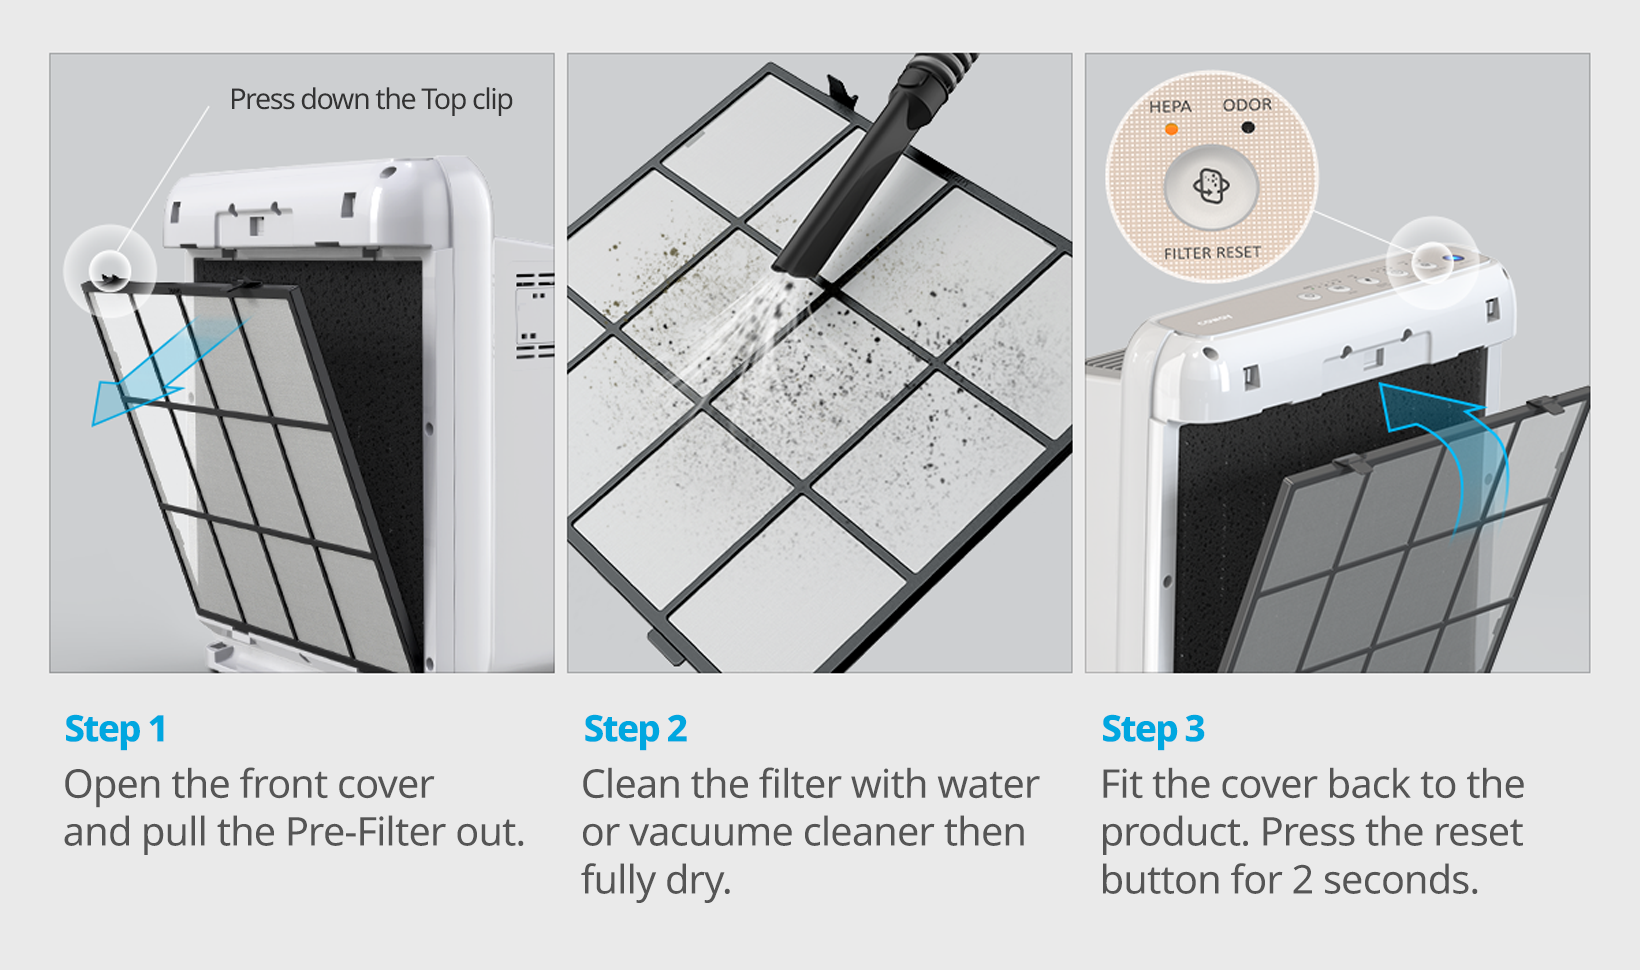 Step 1. Open the front cover and pull the pre-filter out.
Step 2. Clean the filter with water or vaccume cleaner then fully dry.
Step 3. Fit the cover back to the product. Press the reset button for 2 seconds.